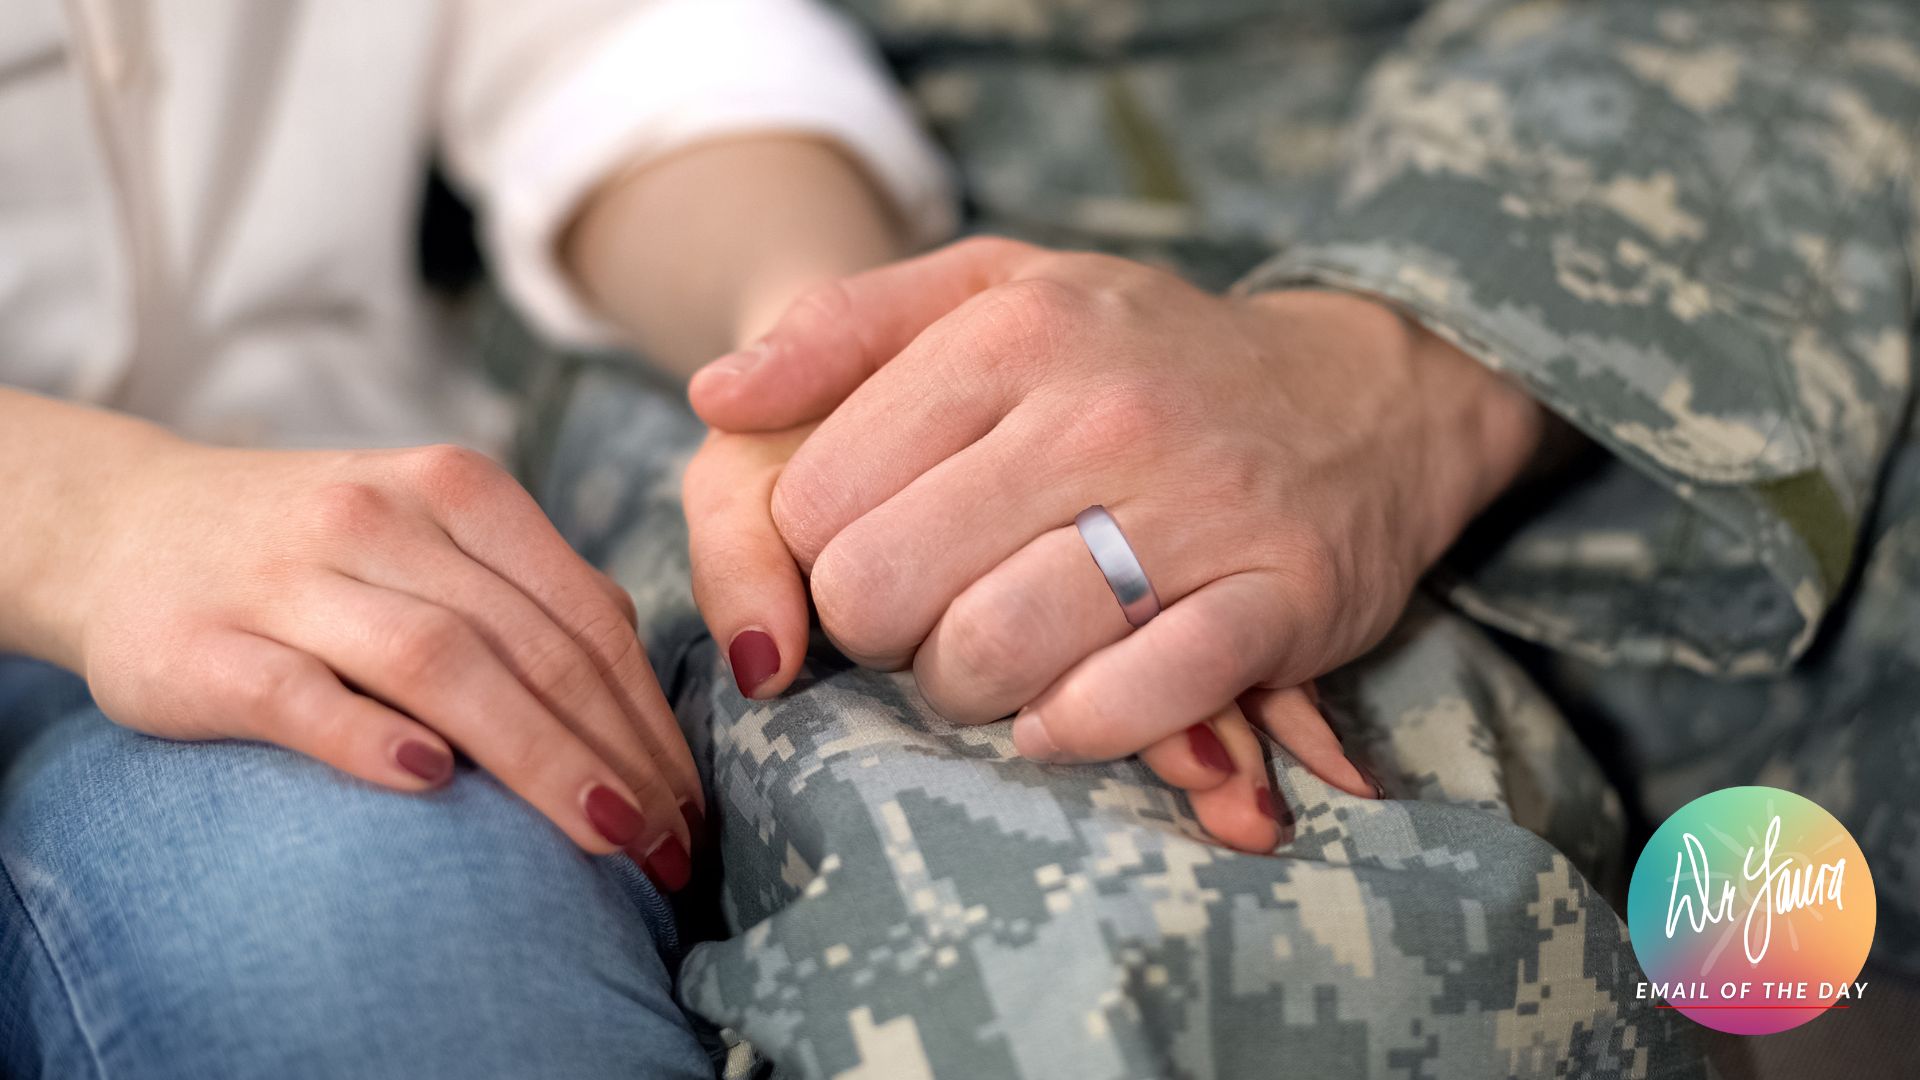 Man in army uniform holds woman's hand on his leg